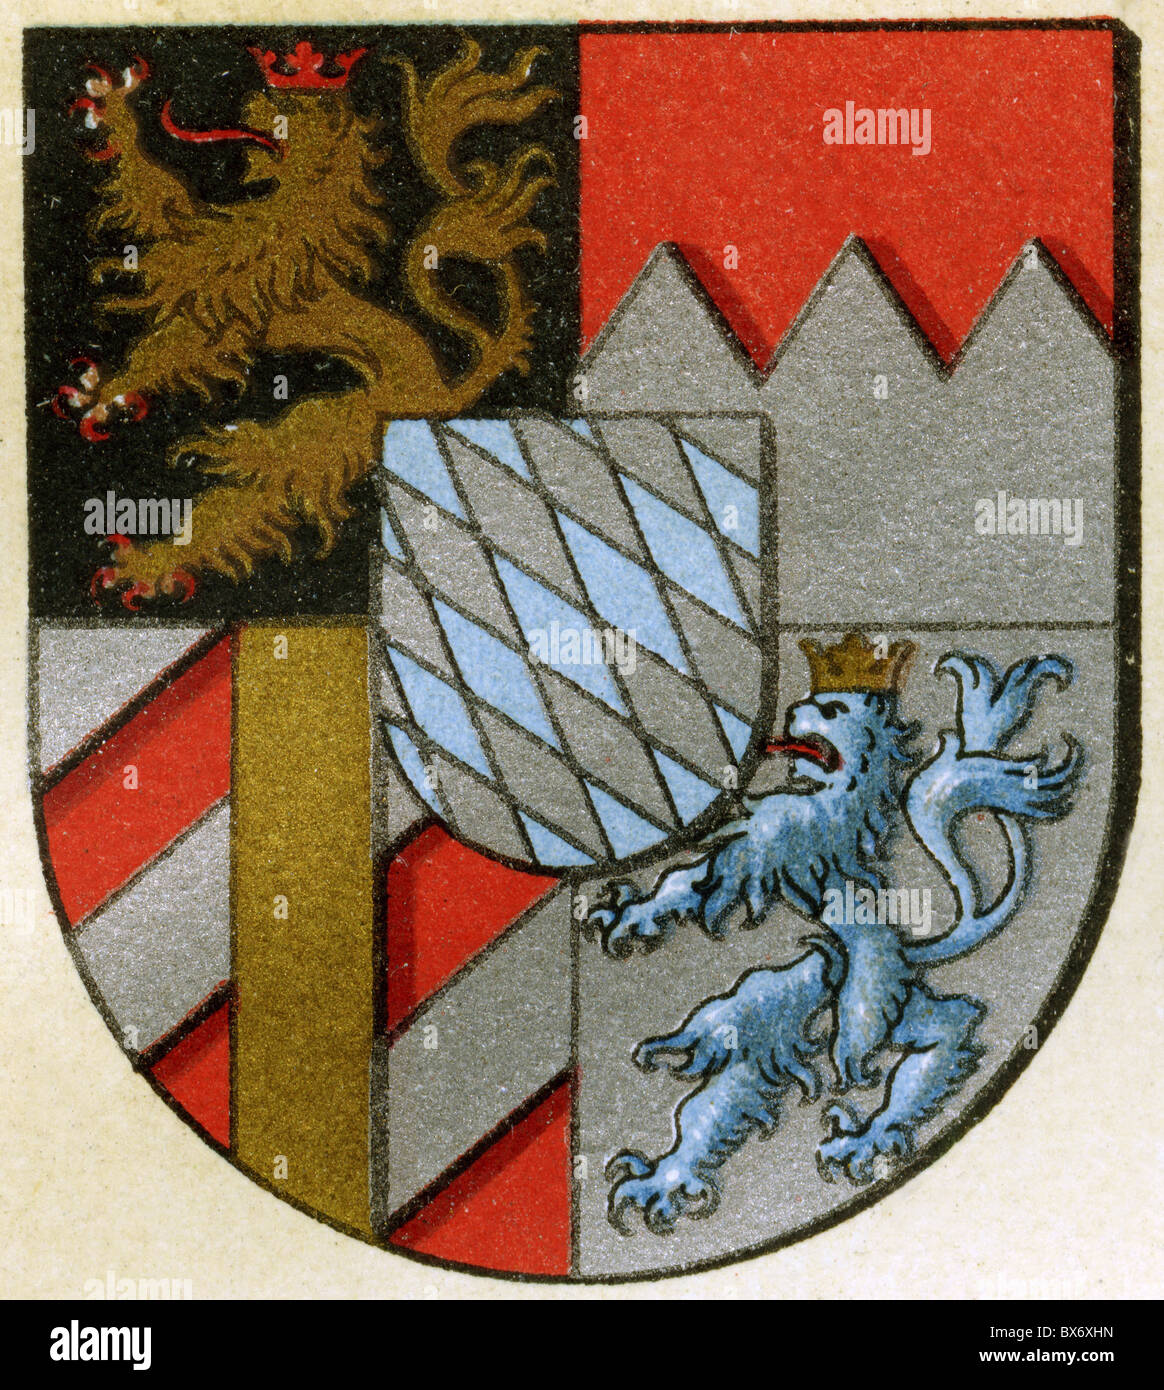 heraldy, coat of arms, Germany, Bavaria, national coat of arms, colour lithograph, Meyers Encylopedia, 1908, Additional-Rights-Clearences-Not Available Stock Photo